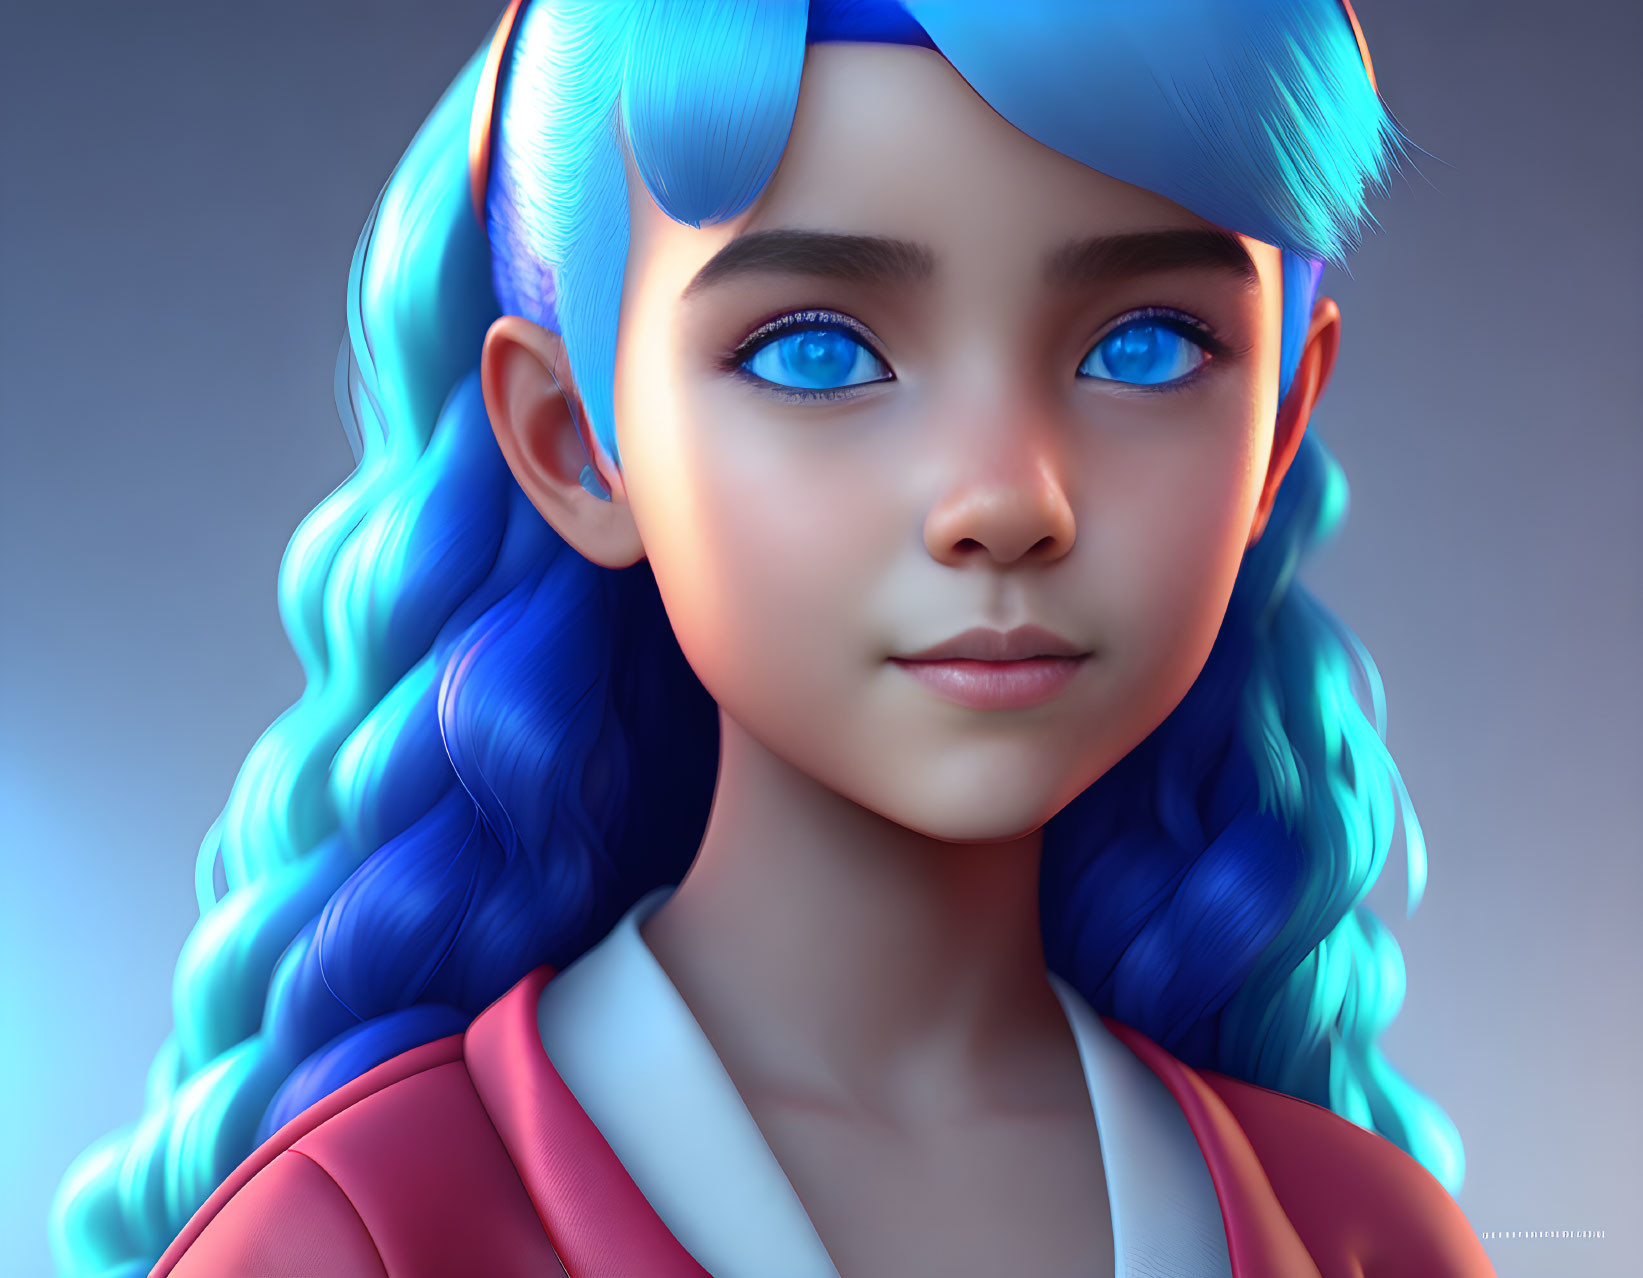 Detailed digital artwork: girl with blue hair and eyes